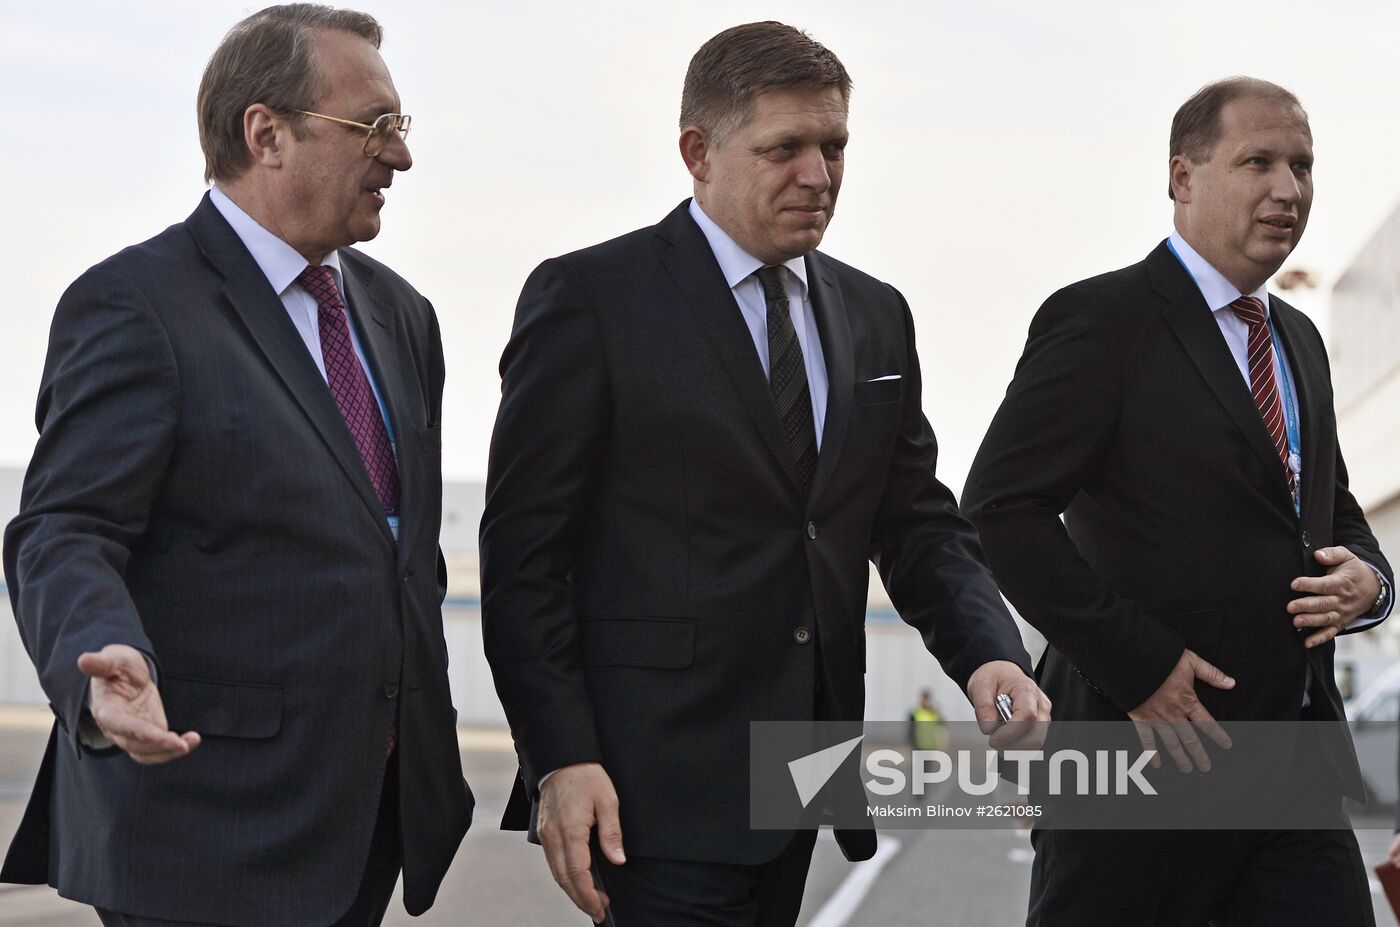 Prime Minister of Slovakia Robert Fico arrives in Moscow